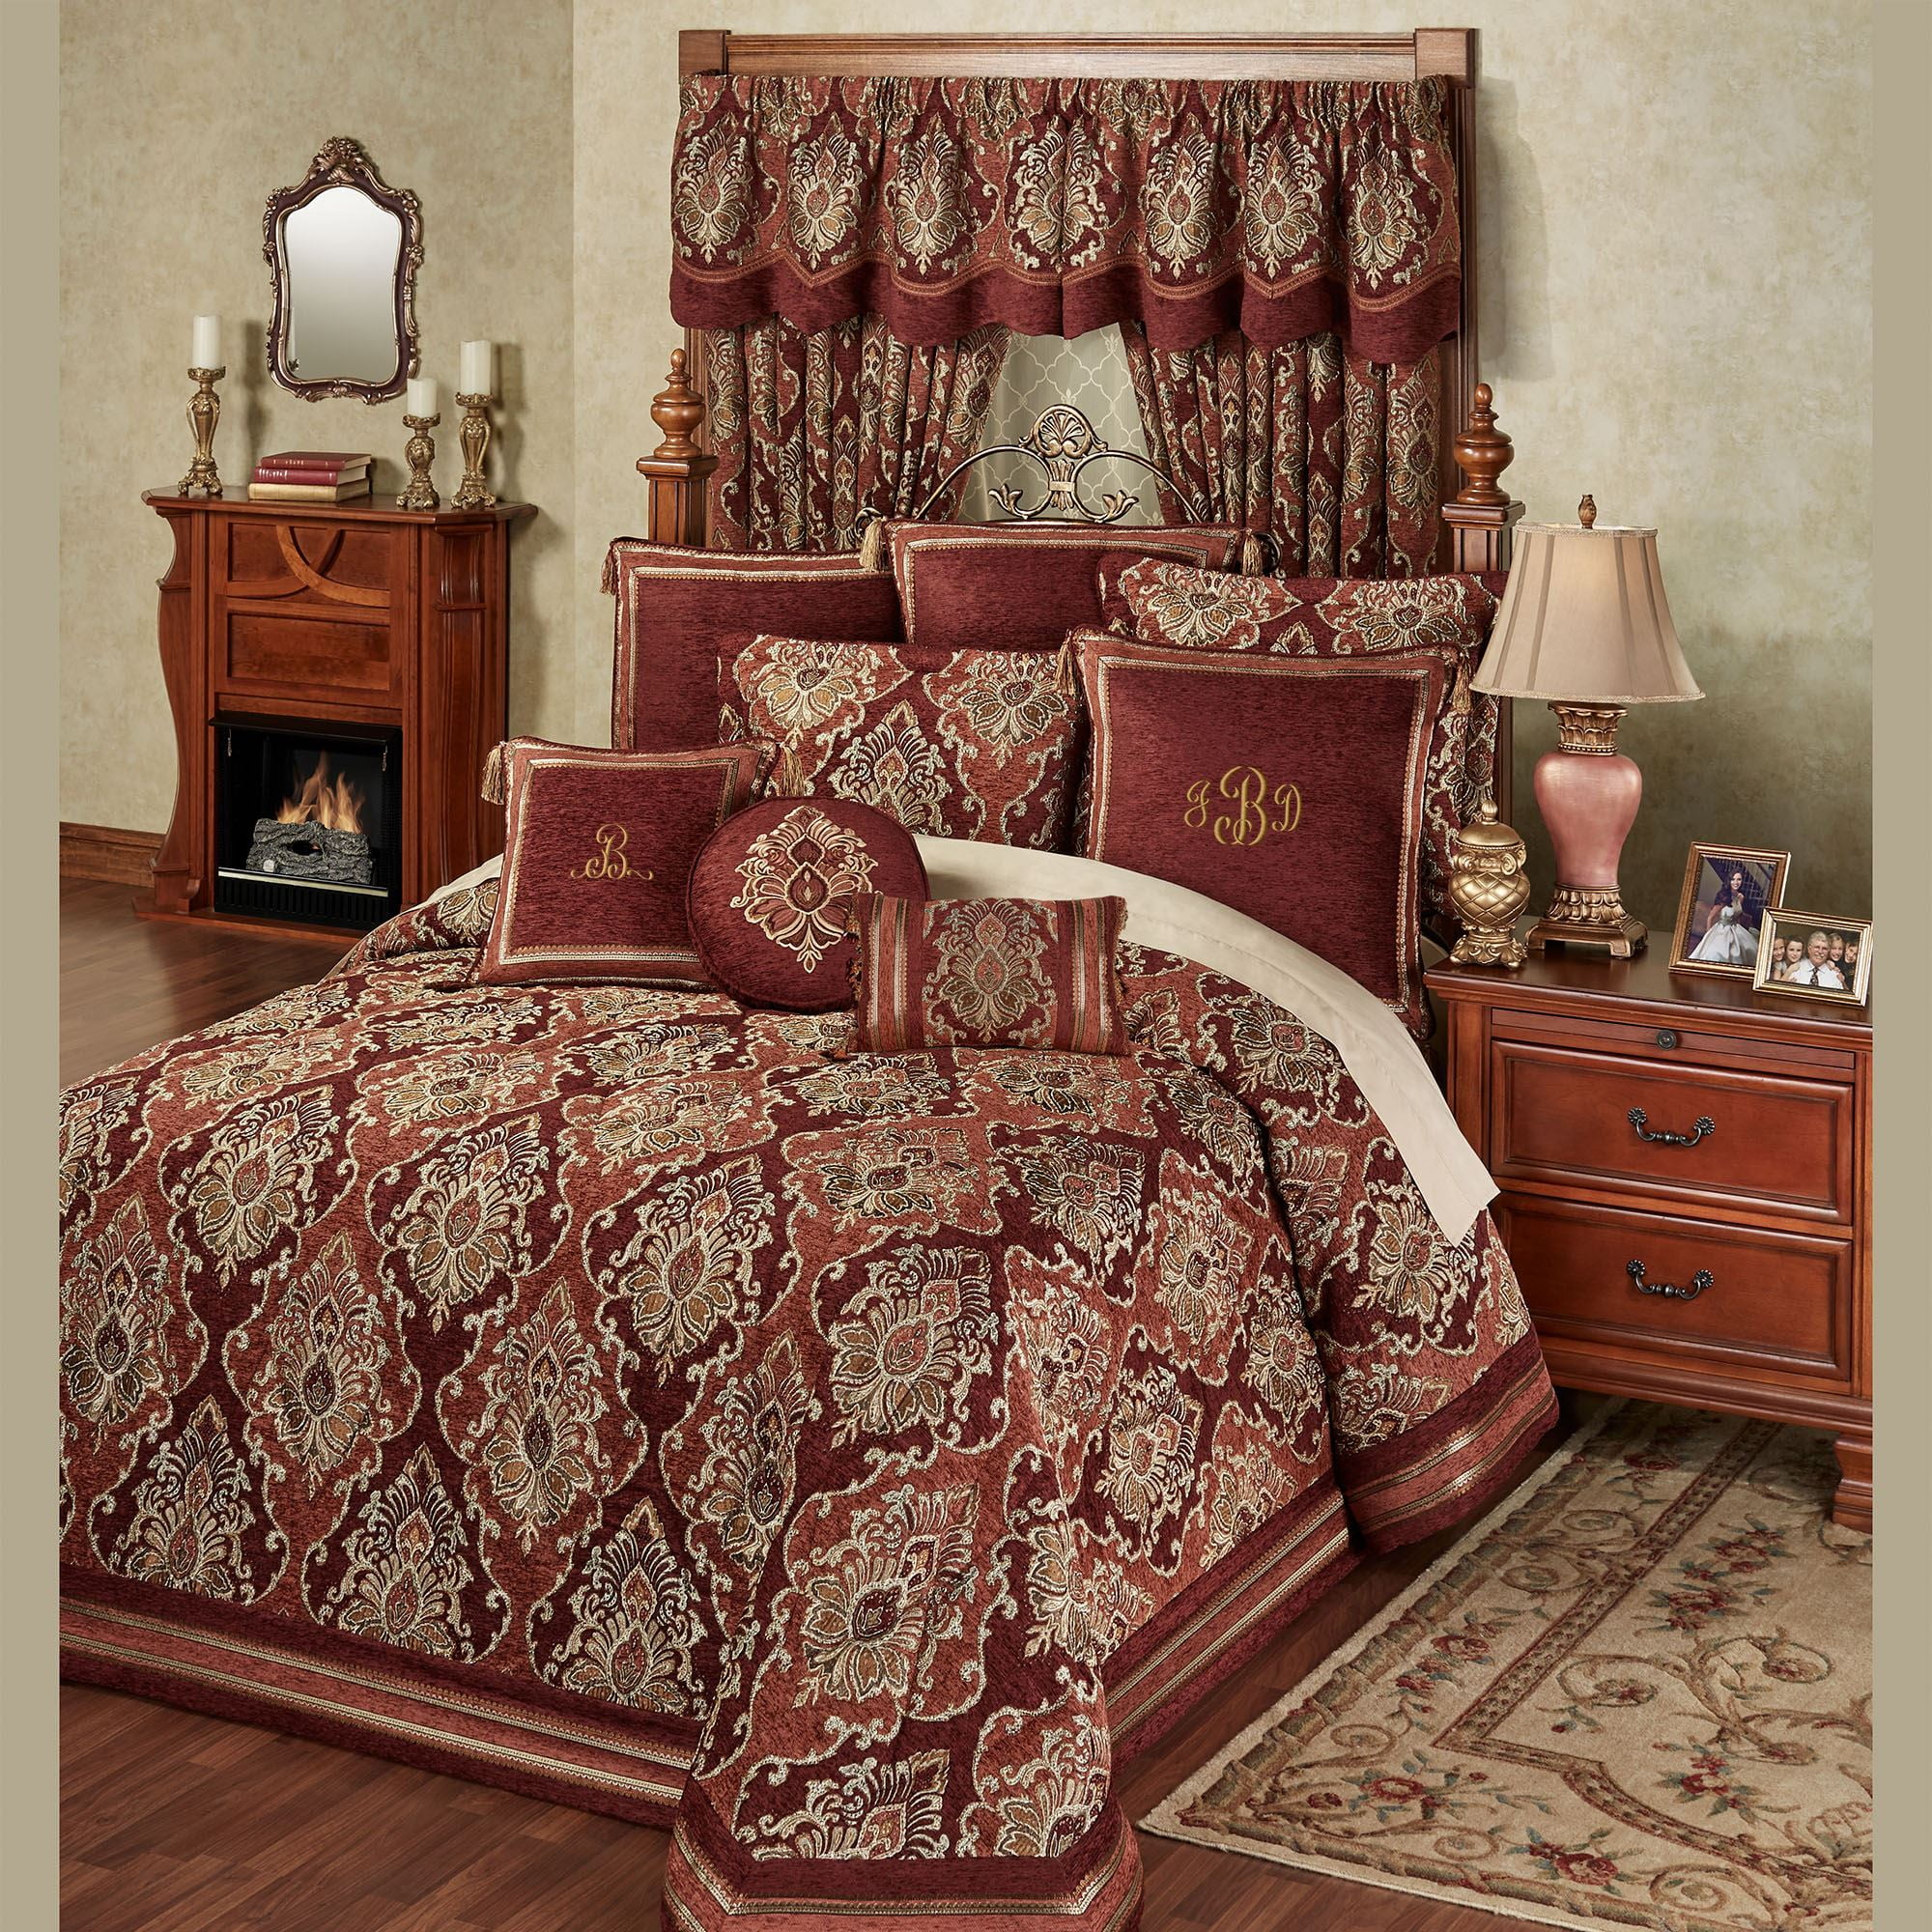 Ravenna Grande Bedspread - Jacquard Chenille Quilted - Victorian ...